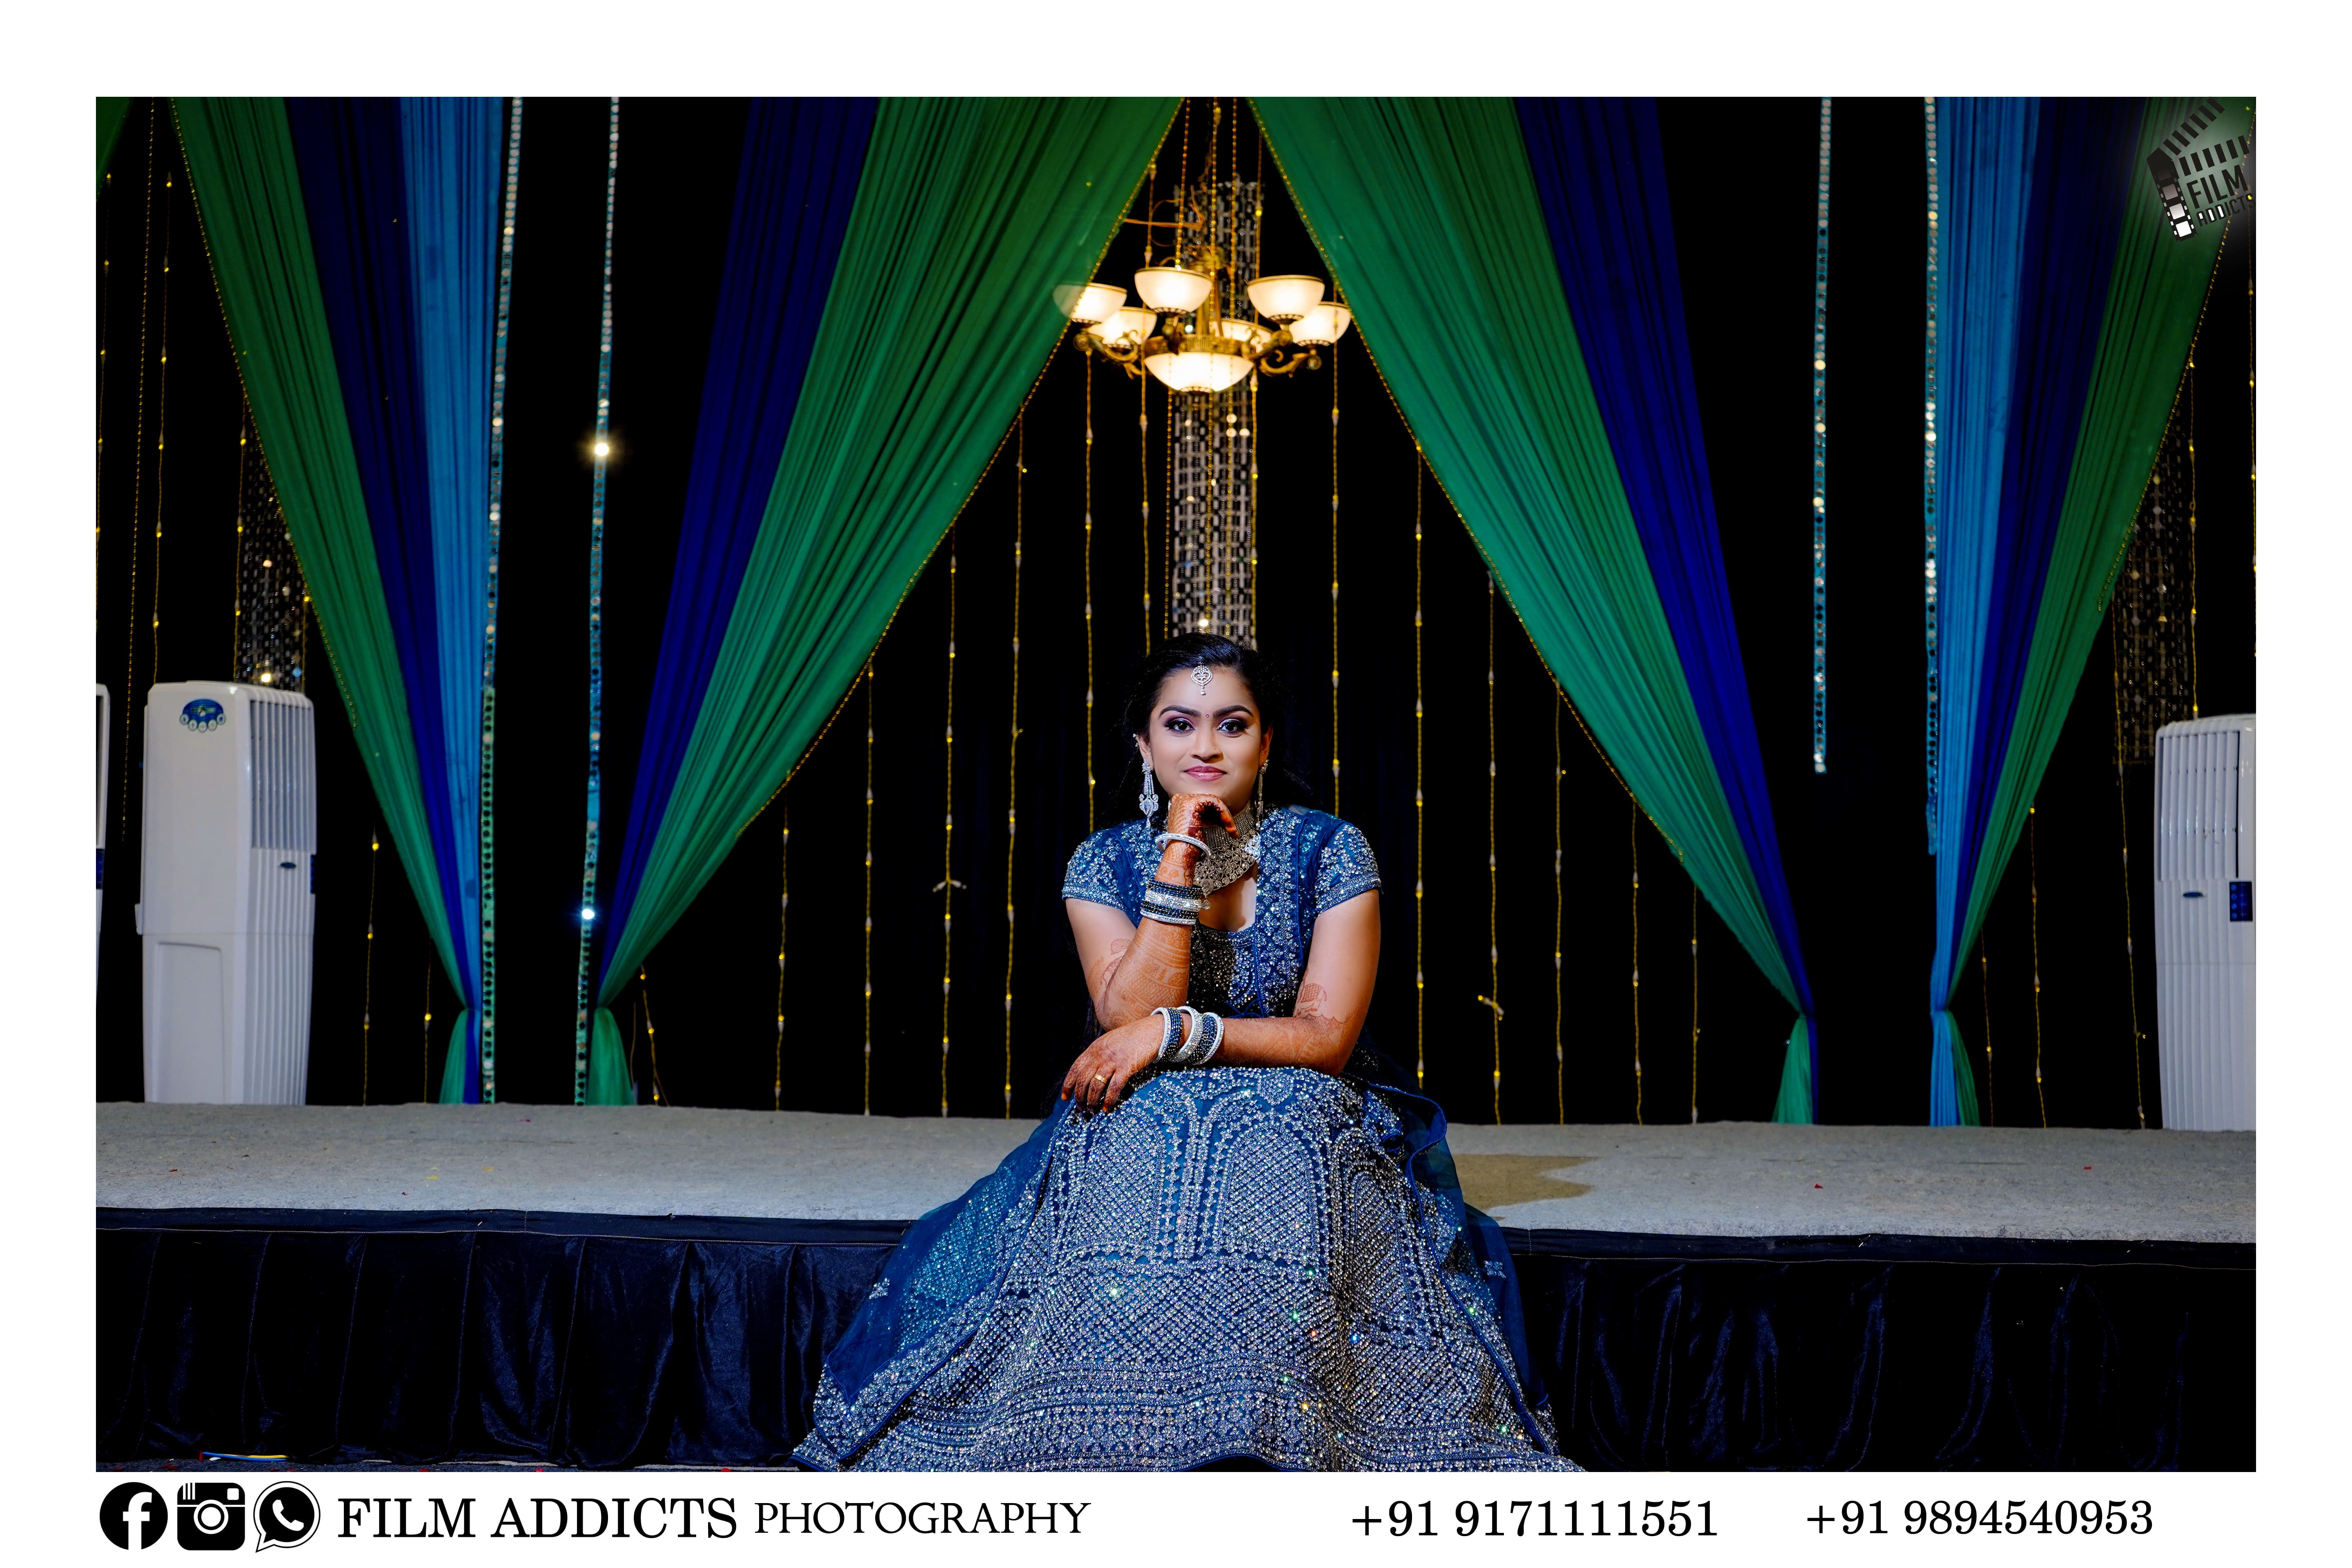 Best candid Photographers in Dindigul, best wedding photographers in Dindigul,best wedding photography in Dindigul,best candid photographers in Dindigul,best candid photography in Dindigul,best marriage photographers in Dindigul,best marriage photography in Dindigul,best photographers in Dindigul,best photography in Dindigul,best wedding candid photography in Dindigul,best wedding candid photographers in Dindigul,best wedding video in Dindigul,best wedding videographers in Dindigul,best wedding videography in Dindigul,best candid videographers in Dindigul,best candid videography in Dindigul,best marriage videographers in Dindigul,best marriage videography in Dindigul,best videographers in Dindigul,best videography in Dindigul,best wedding candid videography in Dindigul,best wedding candid videographers in Dindigul,best helicam operators in Dindigul,best drone operators in Dindigul,best wedding studio in Dindigul,best professional photographers in Dindigul,best professional photography in Dindigul,No.1 wedding photographers in Dindigul,No.1 wedding photography in Dindigul,Dindigul wedding photographers,Dindigul wedding photography,Dindigul wedding videos,best candid videos in Dindigul,best candid photos in Dindigul,best helicam operators photography in Dindigul,best helicam operator photographers in Dindigul,best outdoor videography in Dindigul,best professional wedding photography in Dindigul,best outdoor photography in Dindigul,best outdoor photographers in Dindigul,best drone operators photographers in Dindigul,best wedding candid videography in Dindigul, tamilnadu wedding photography, tamilnadu.